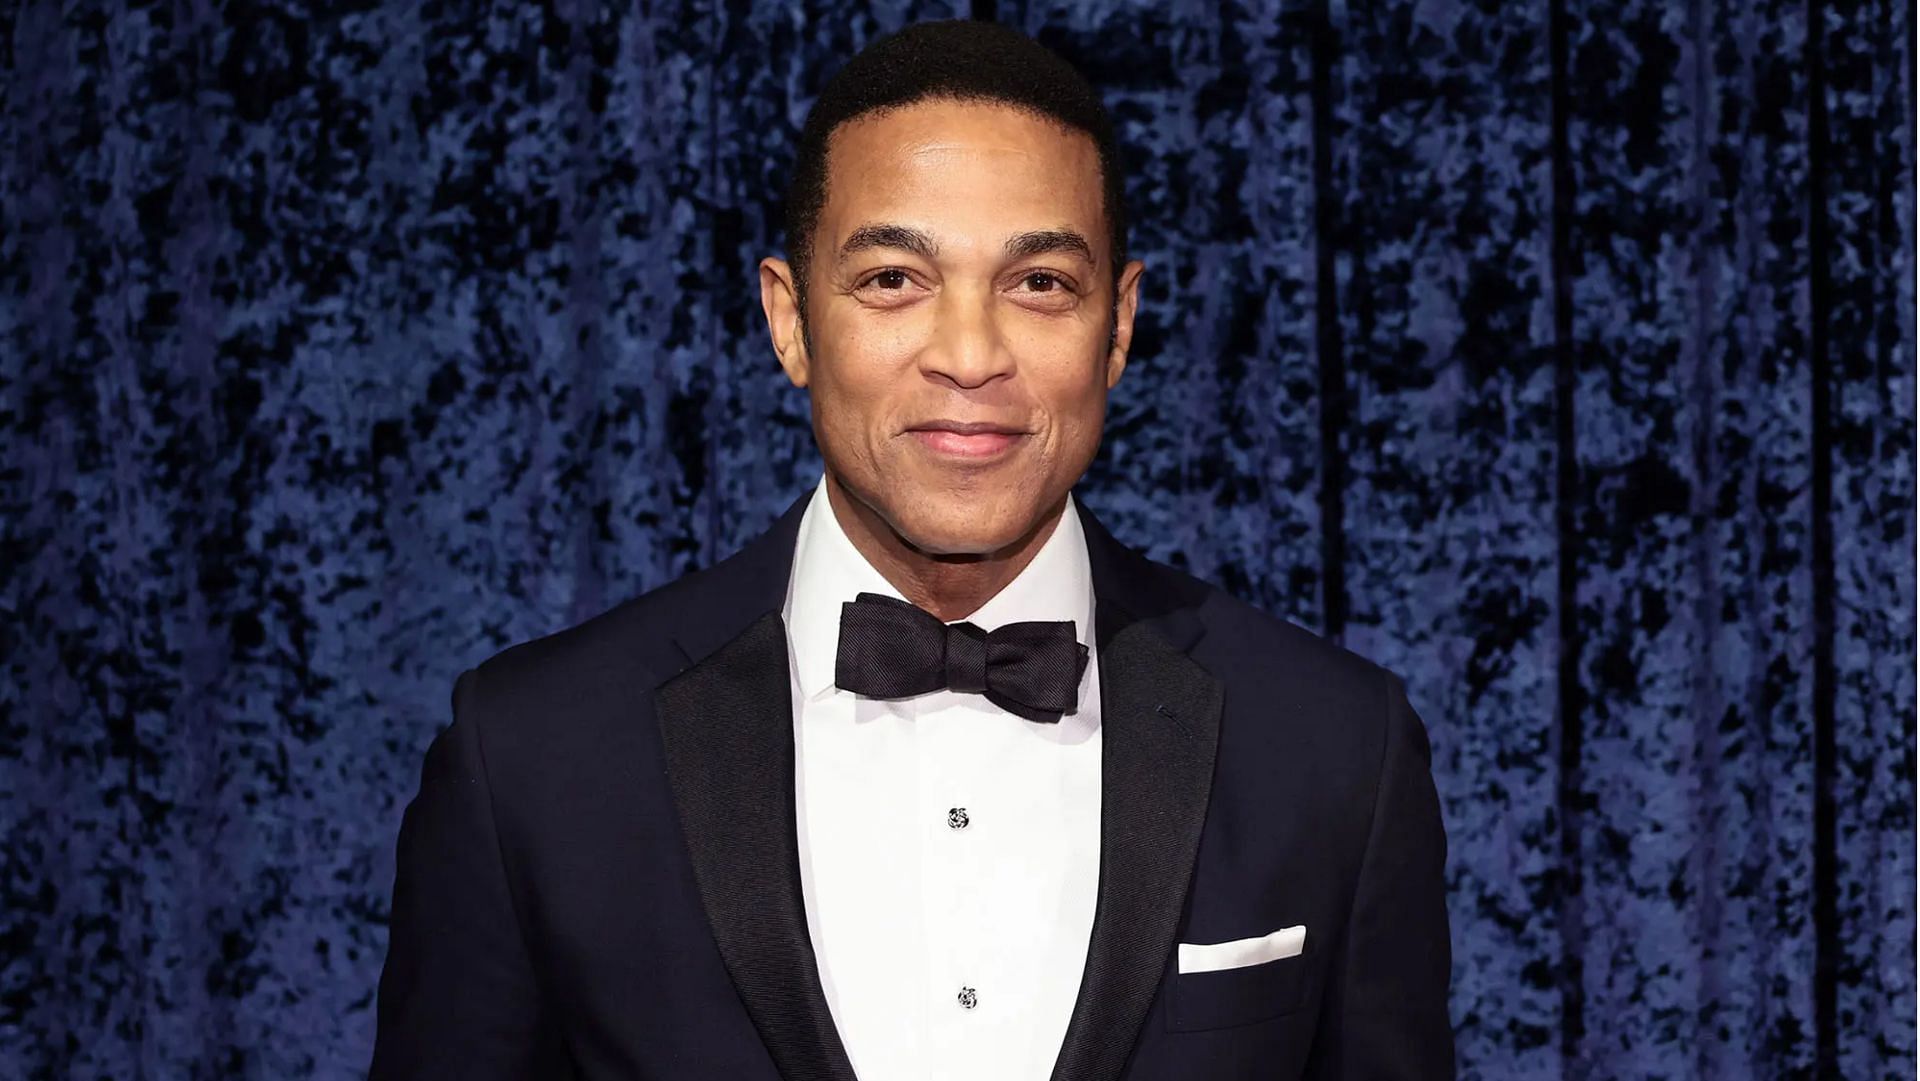 Don Lemon thanked his crew and viewers for making the show successful. (Image via Jamie McCarthy/Getty Images)